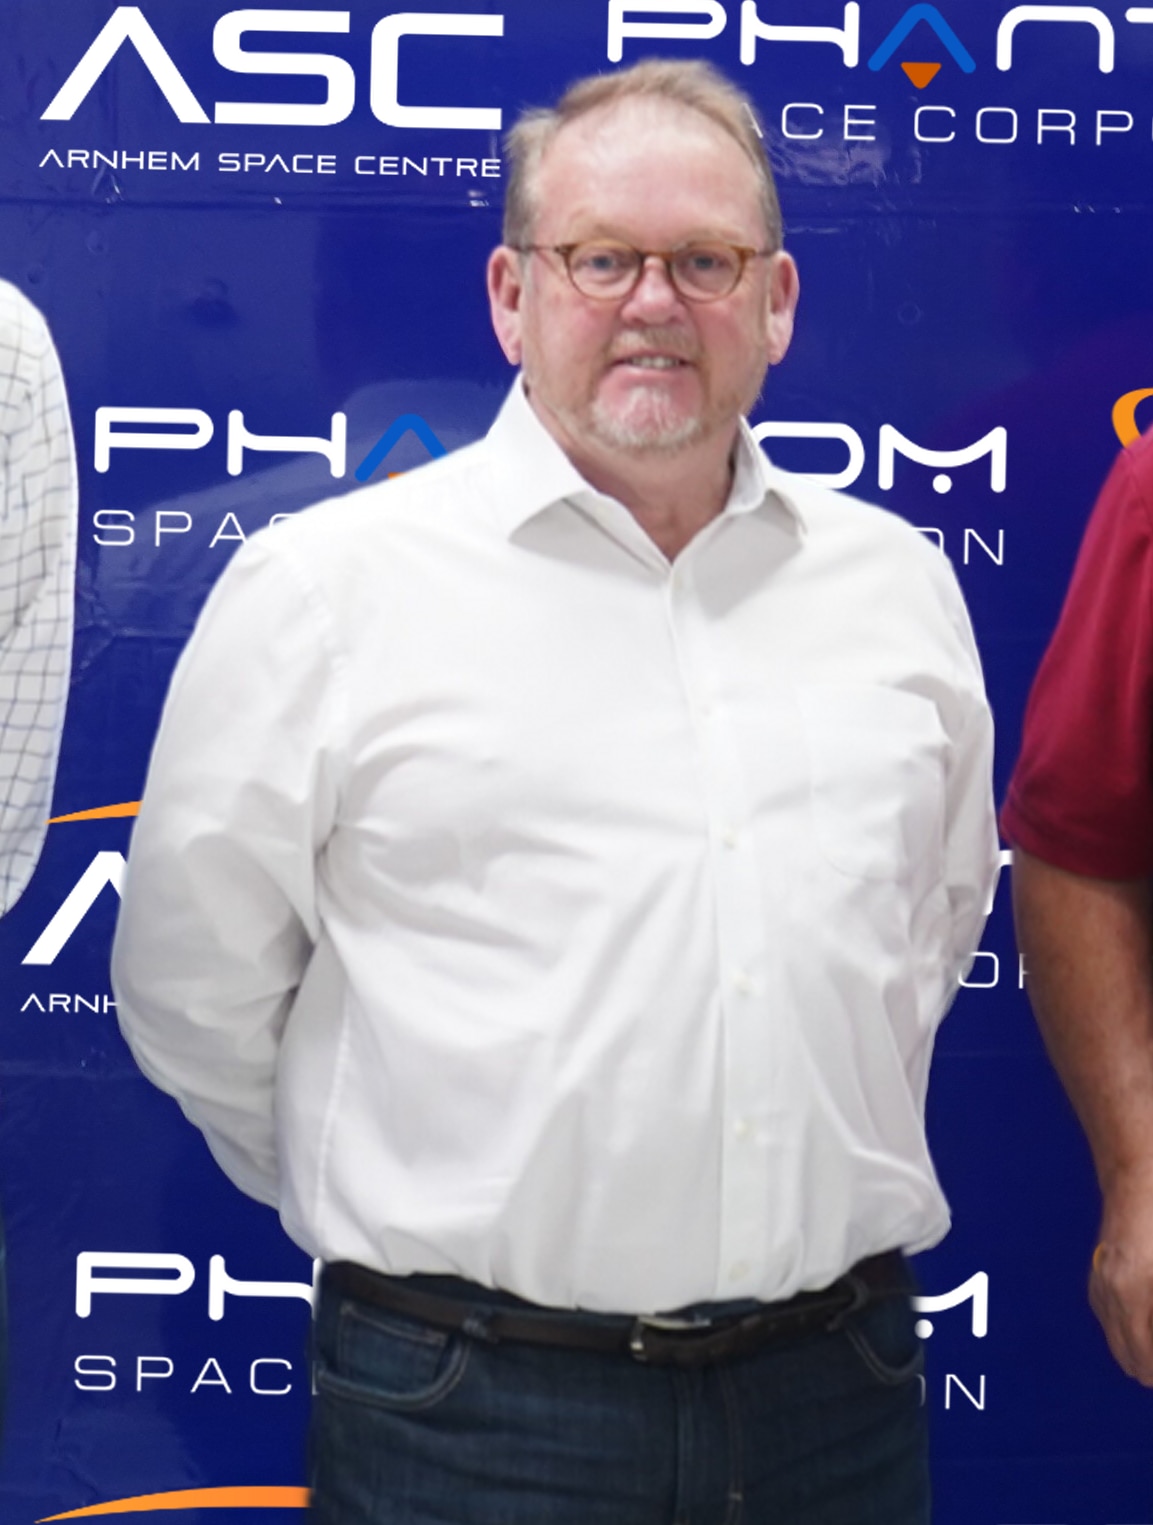 A man wearing glasses and a white dress shirt stands in front of a blue banner